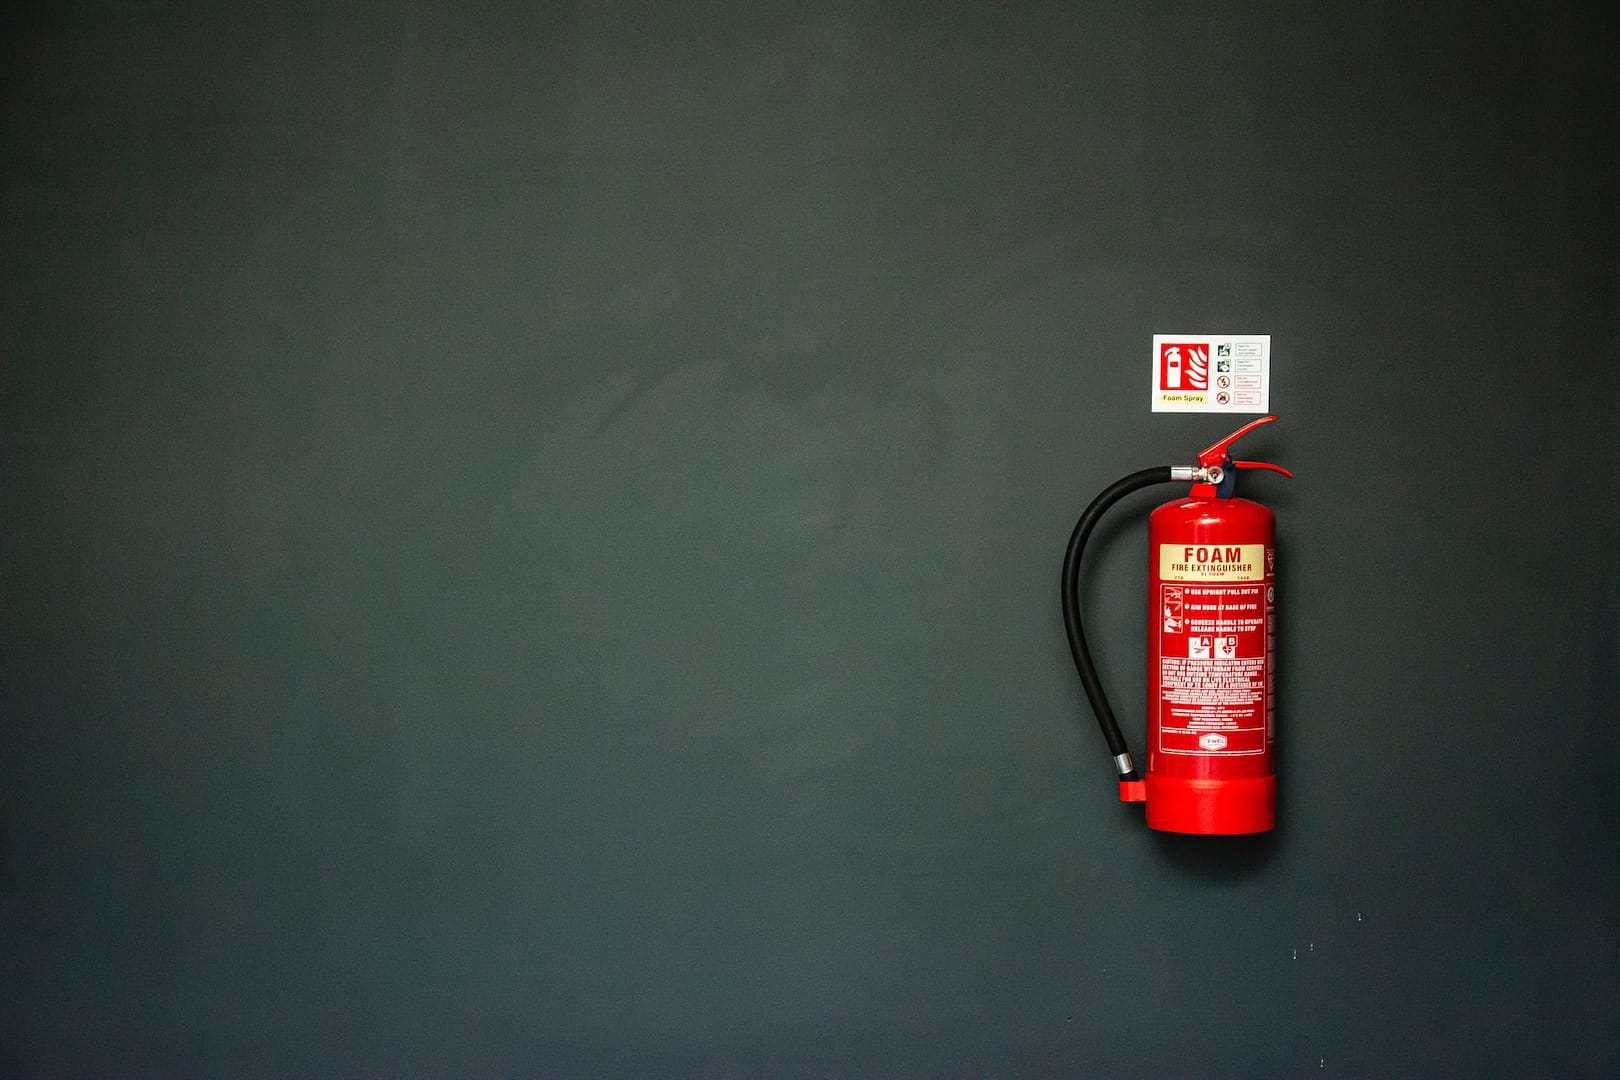 A red fire extinguisher against a dark wall